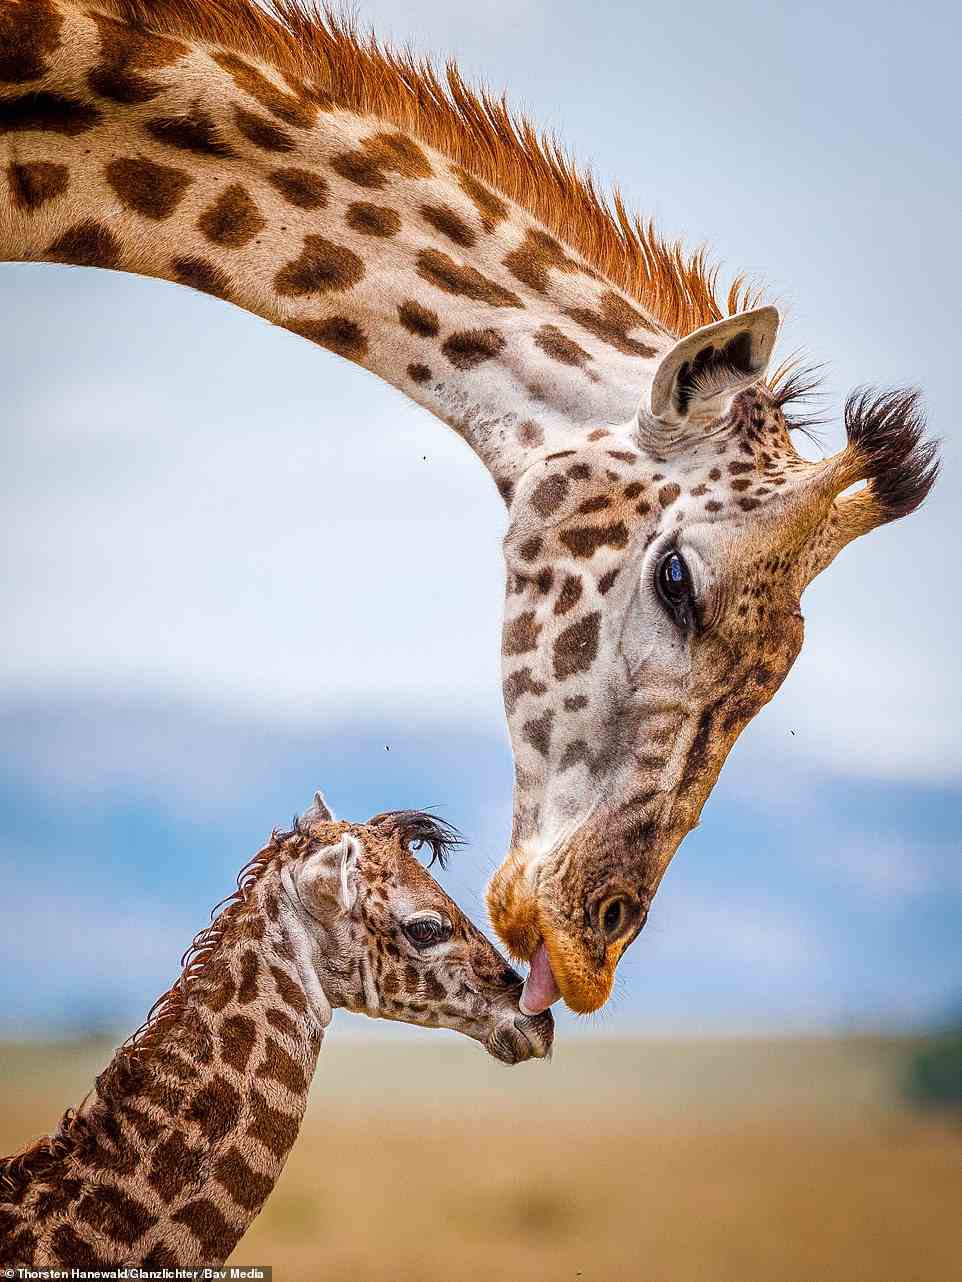 Another runner-up in the World of Mammals category, German photographer Thorsten Hanewald spotted this mother giraffe licking clean her newborn babe in Kenya. Taken just moments after the tiny giraffe took its first steps, Hanewald waited patiently for the mother's beautiful act of care to snap the photo. He said he wanted a picture which showed the giraffes' heads next to each other so they could share a single frame.